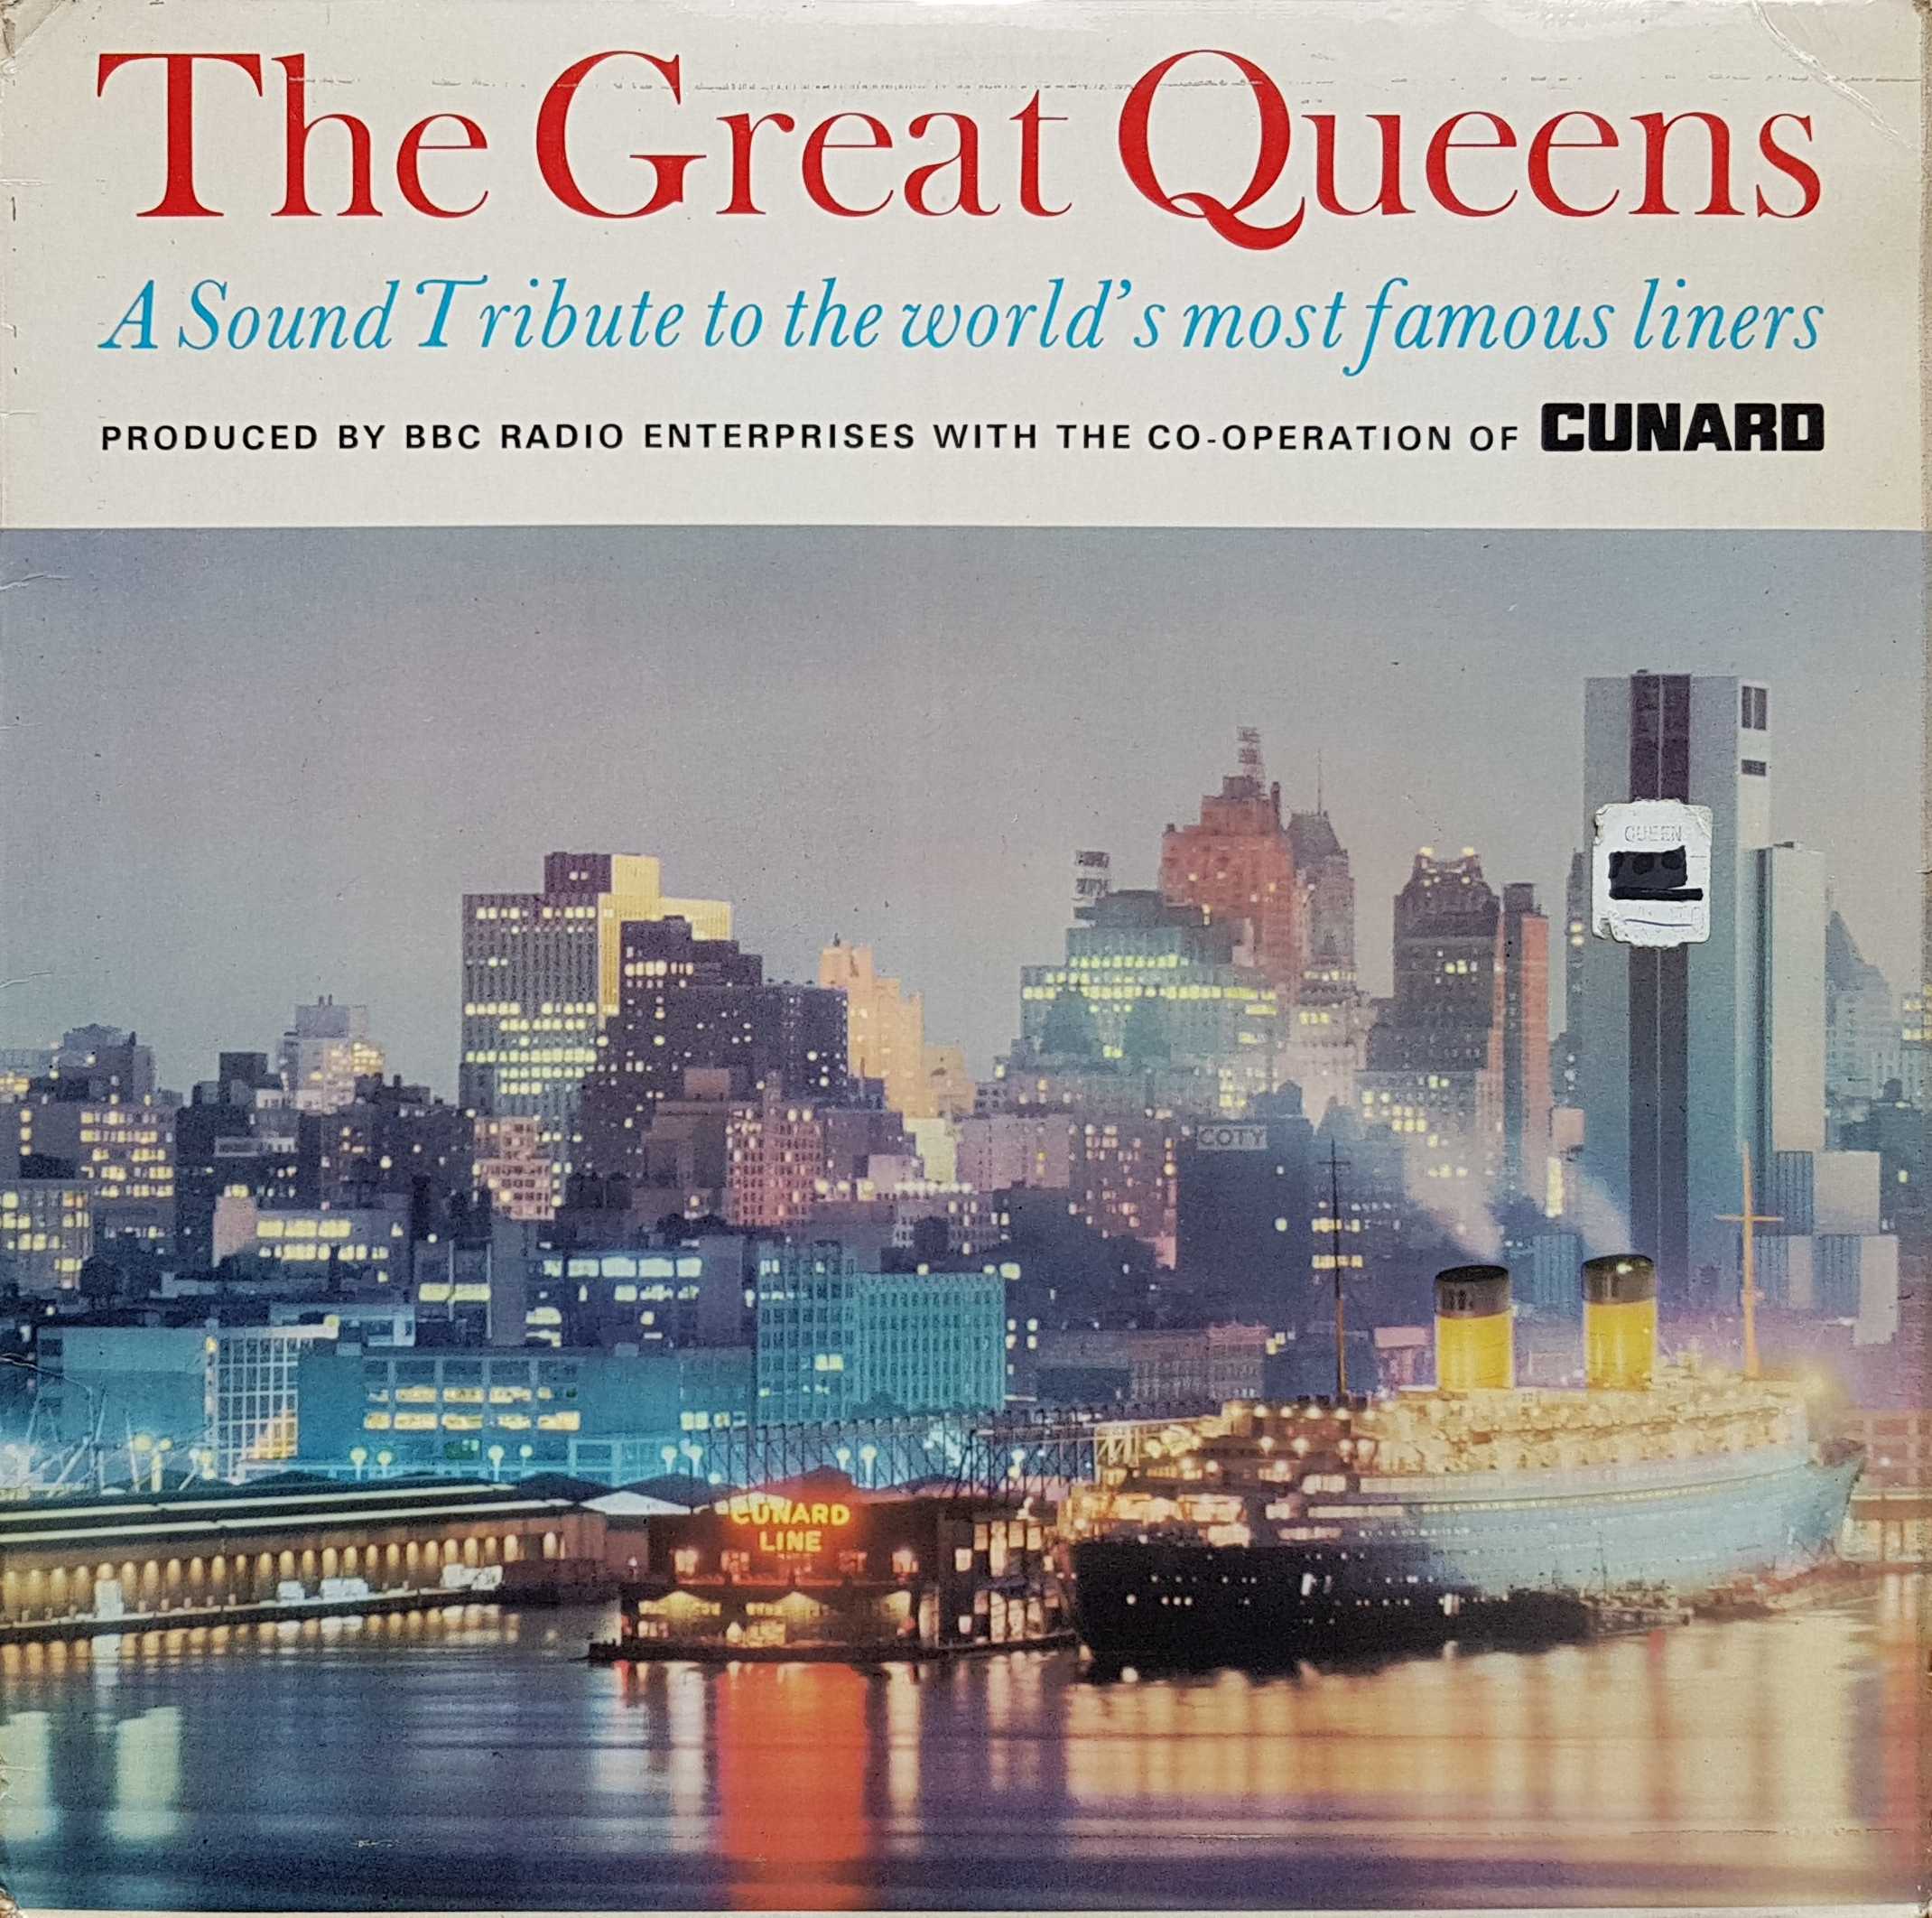 Picture of The great Queens - A sound tribute to the World's most famous liners by artist Robert Stannage from the BBC albums - Records and Tapes library